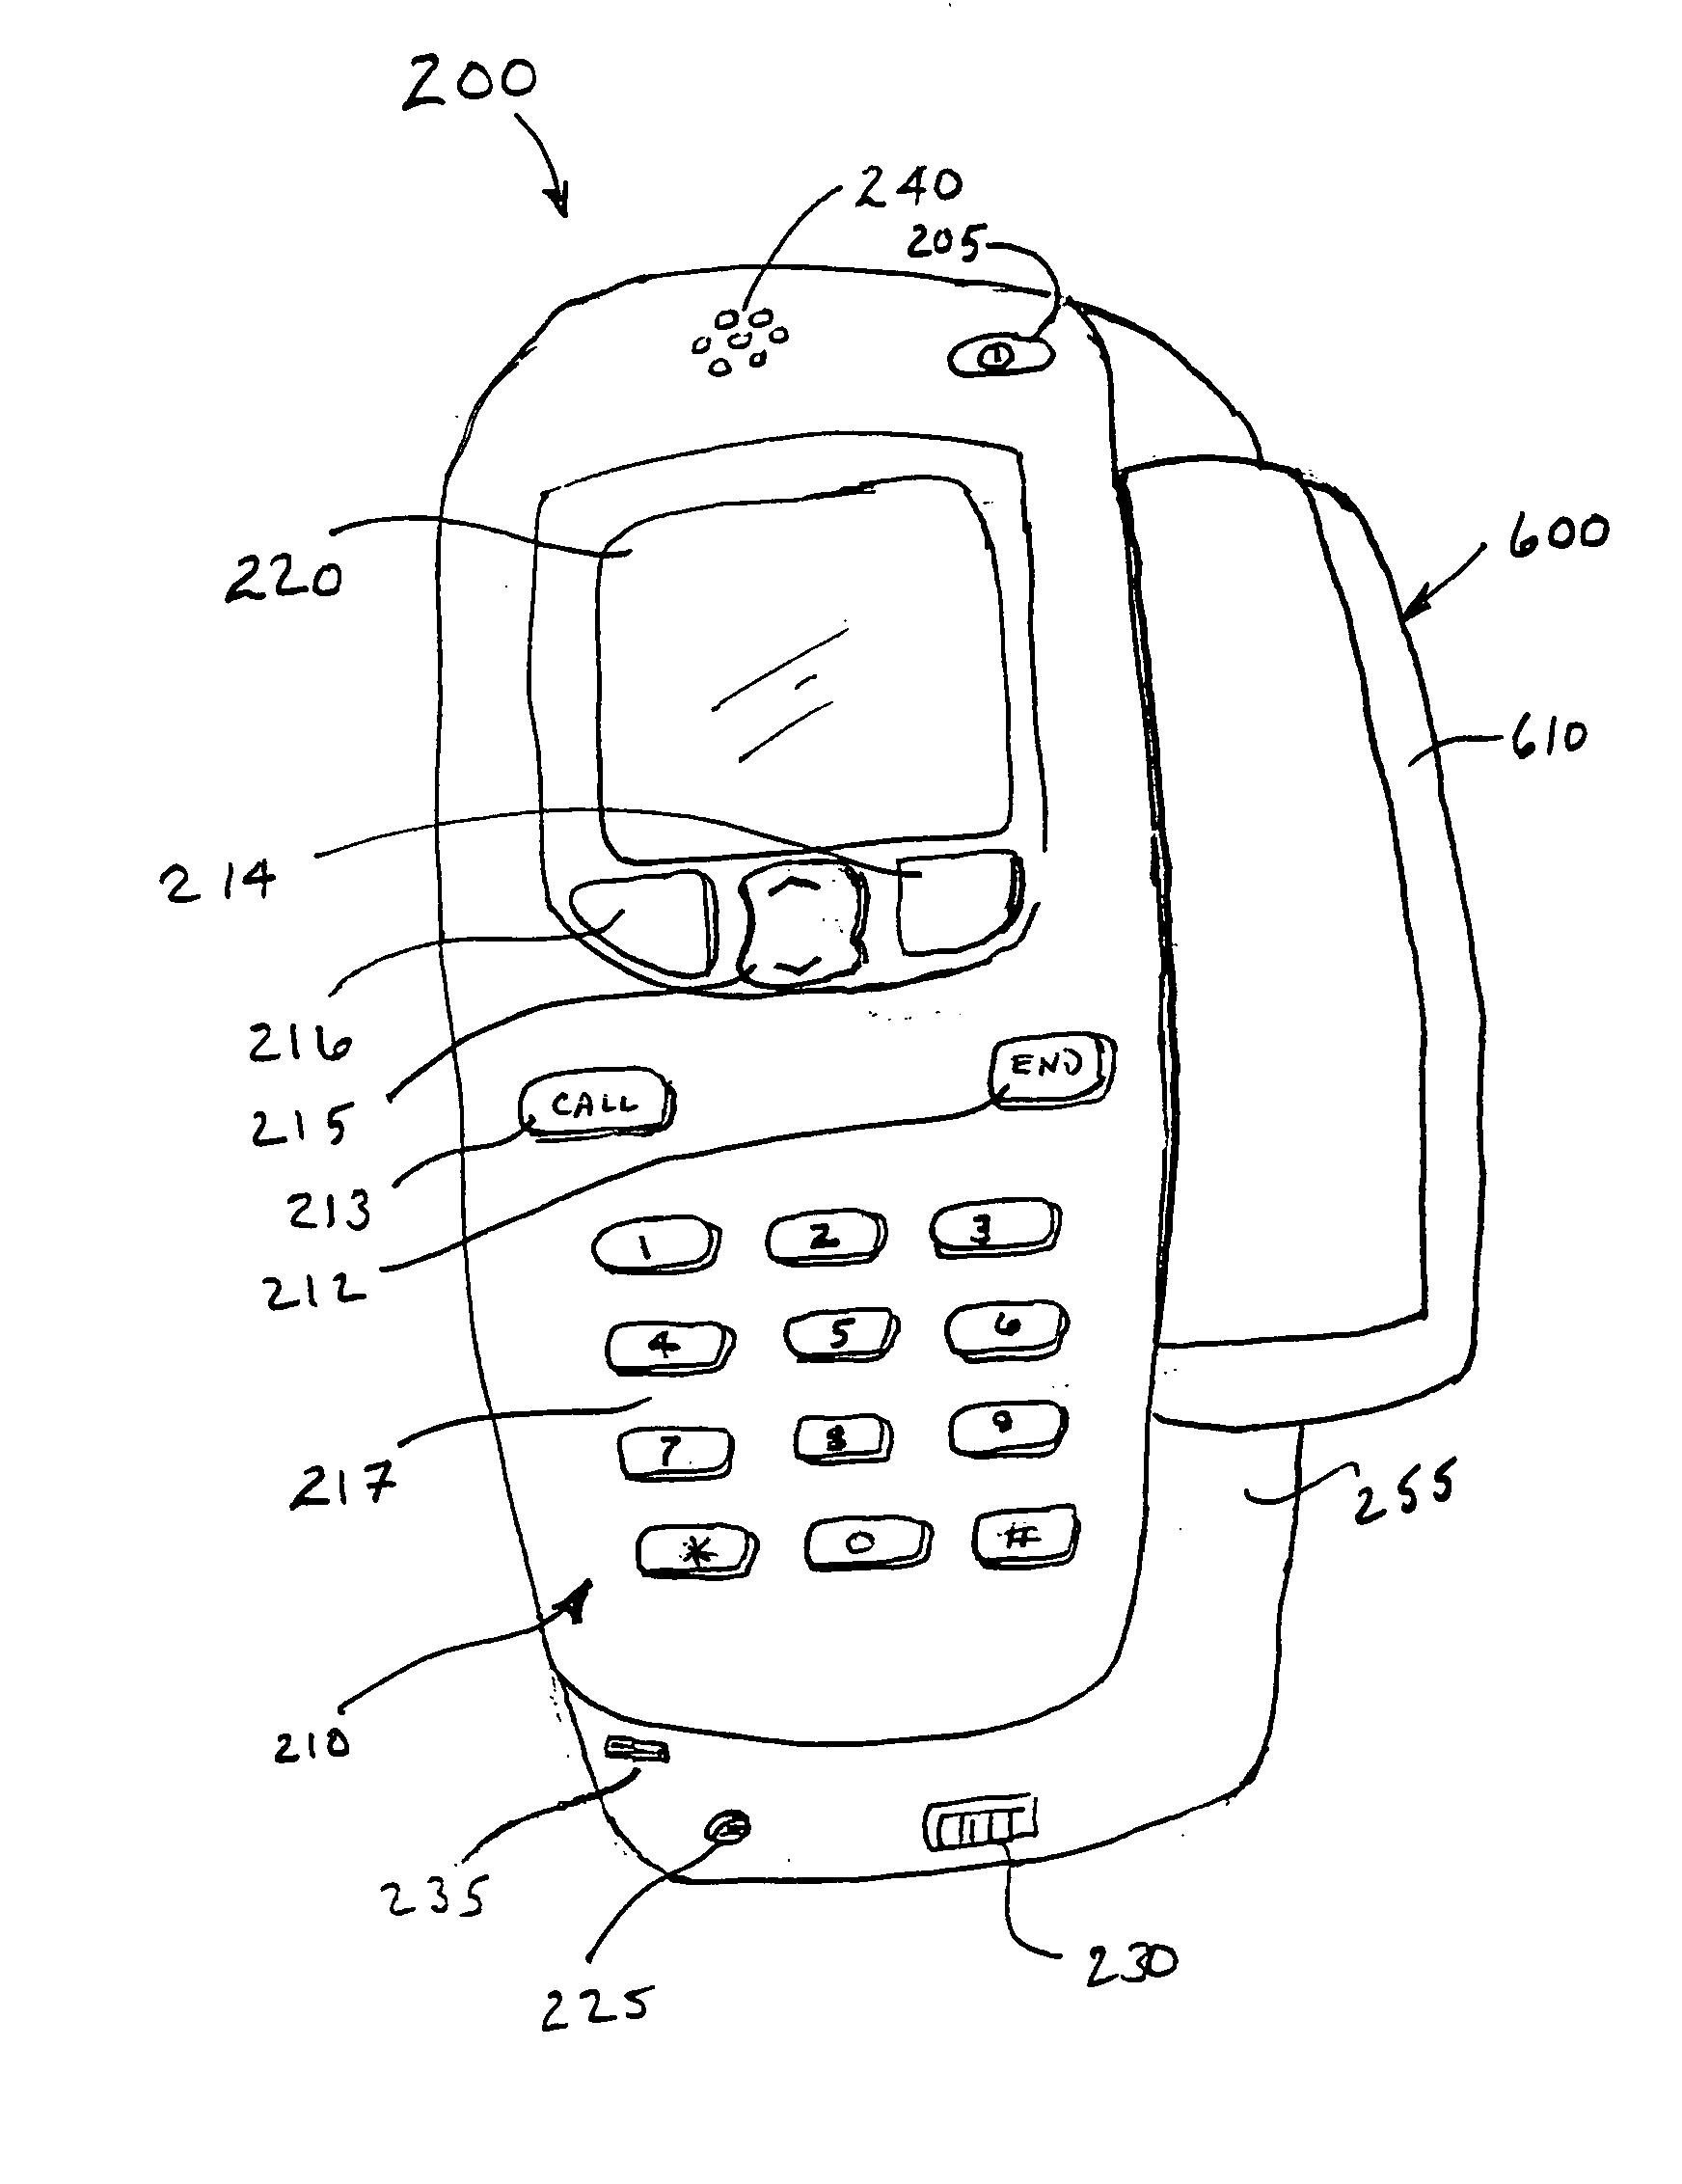 Antenna module for mobile phone